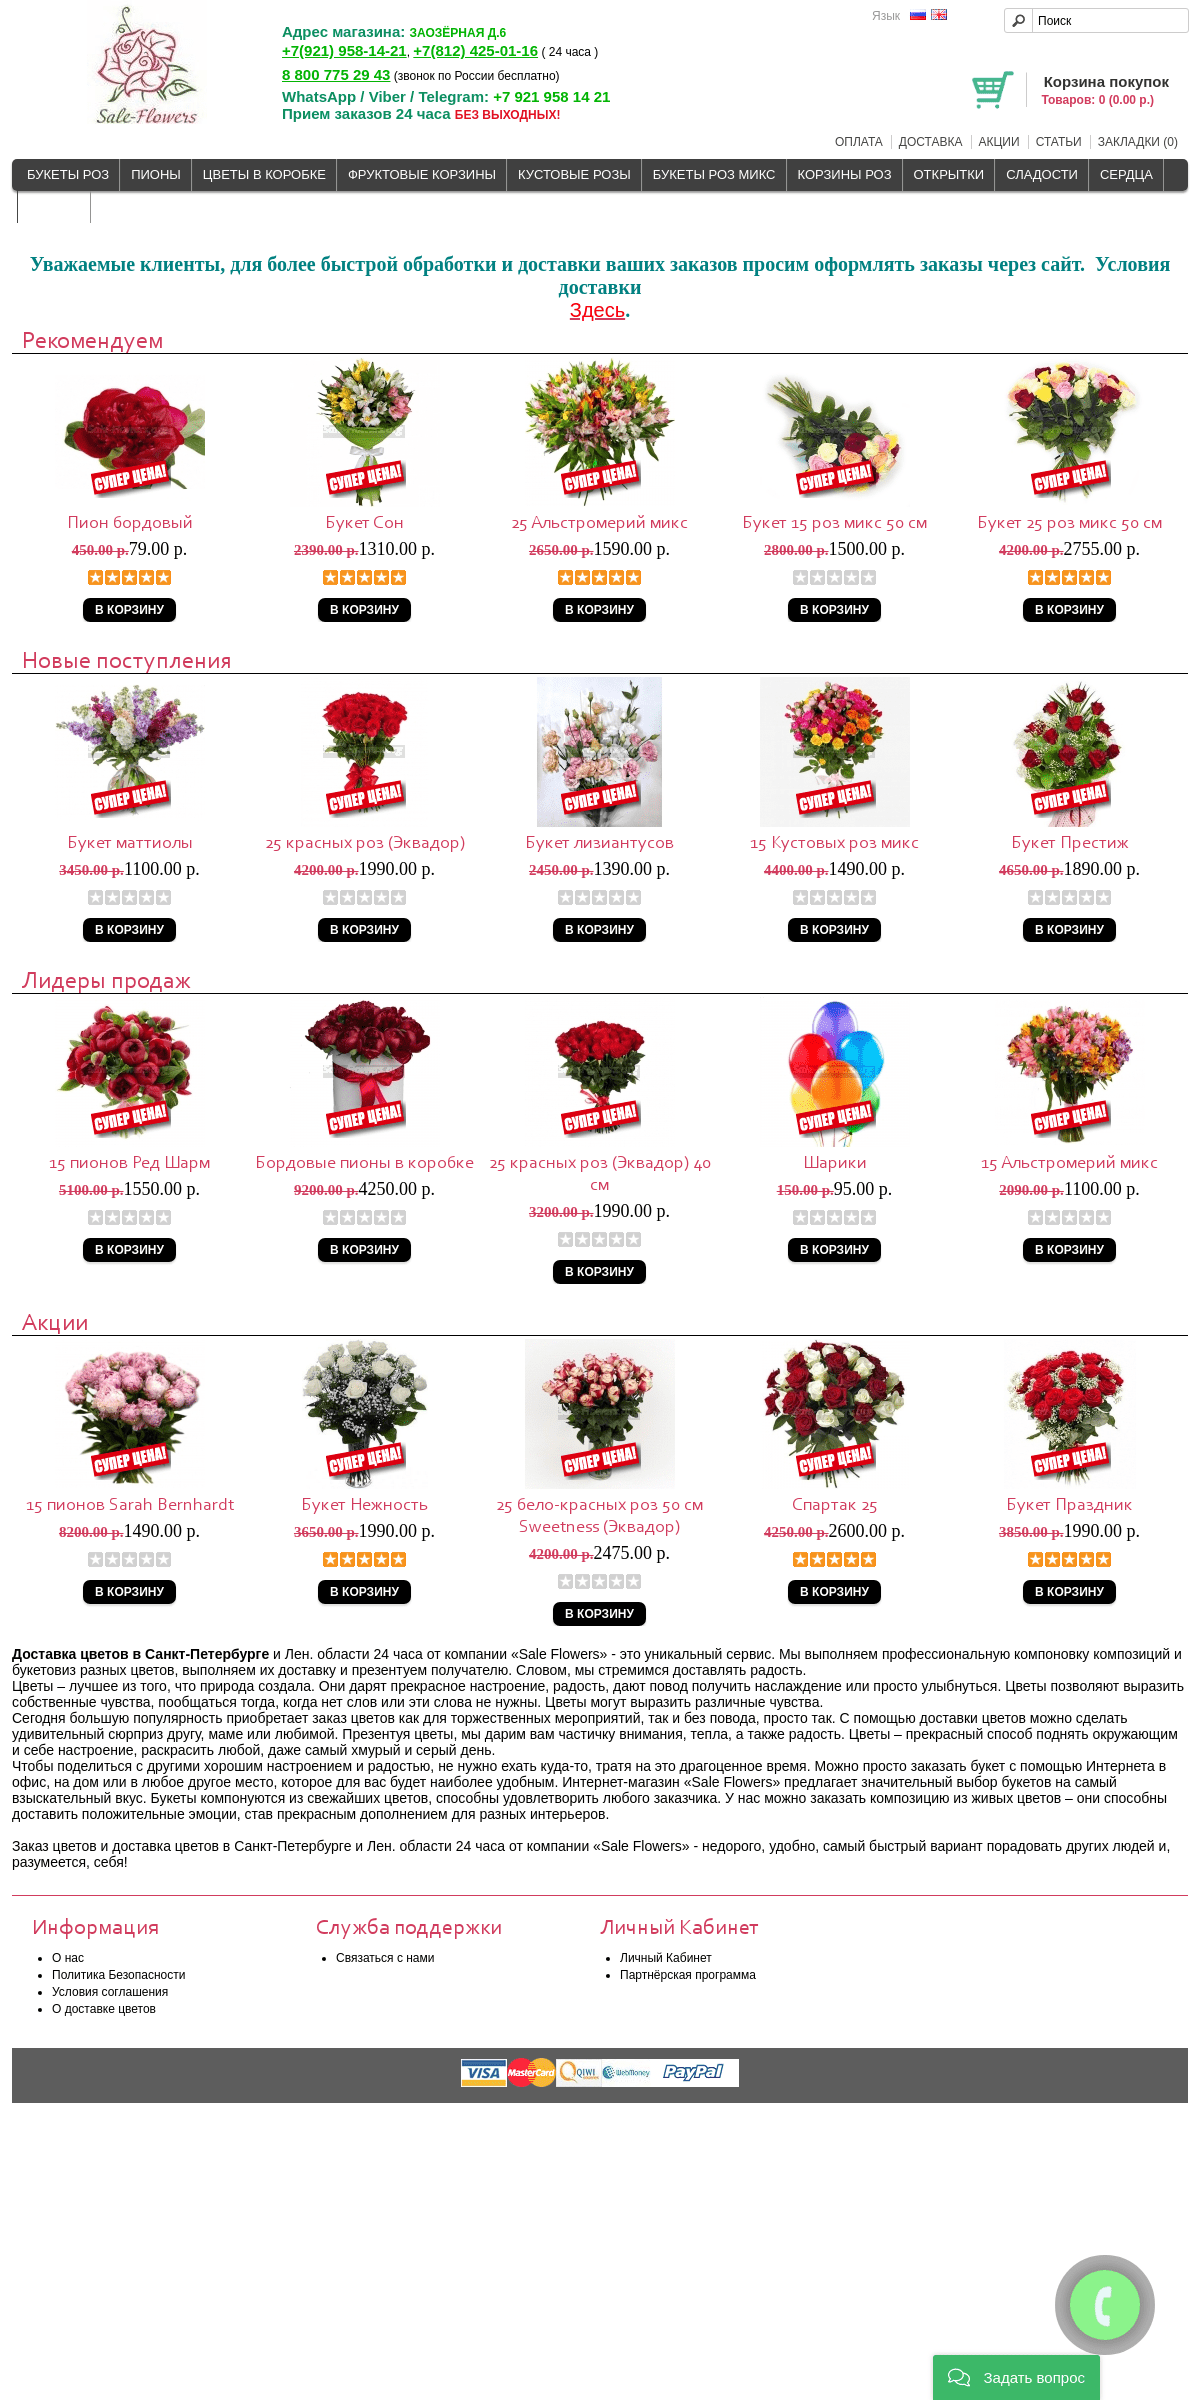 A complete backup of sale-flowers.org